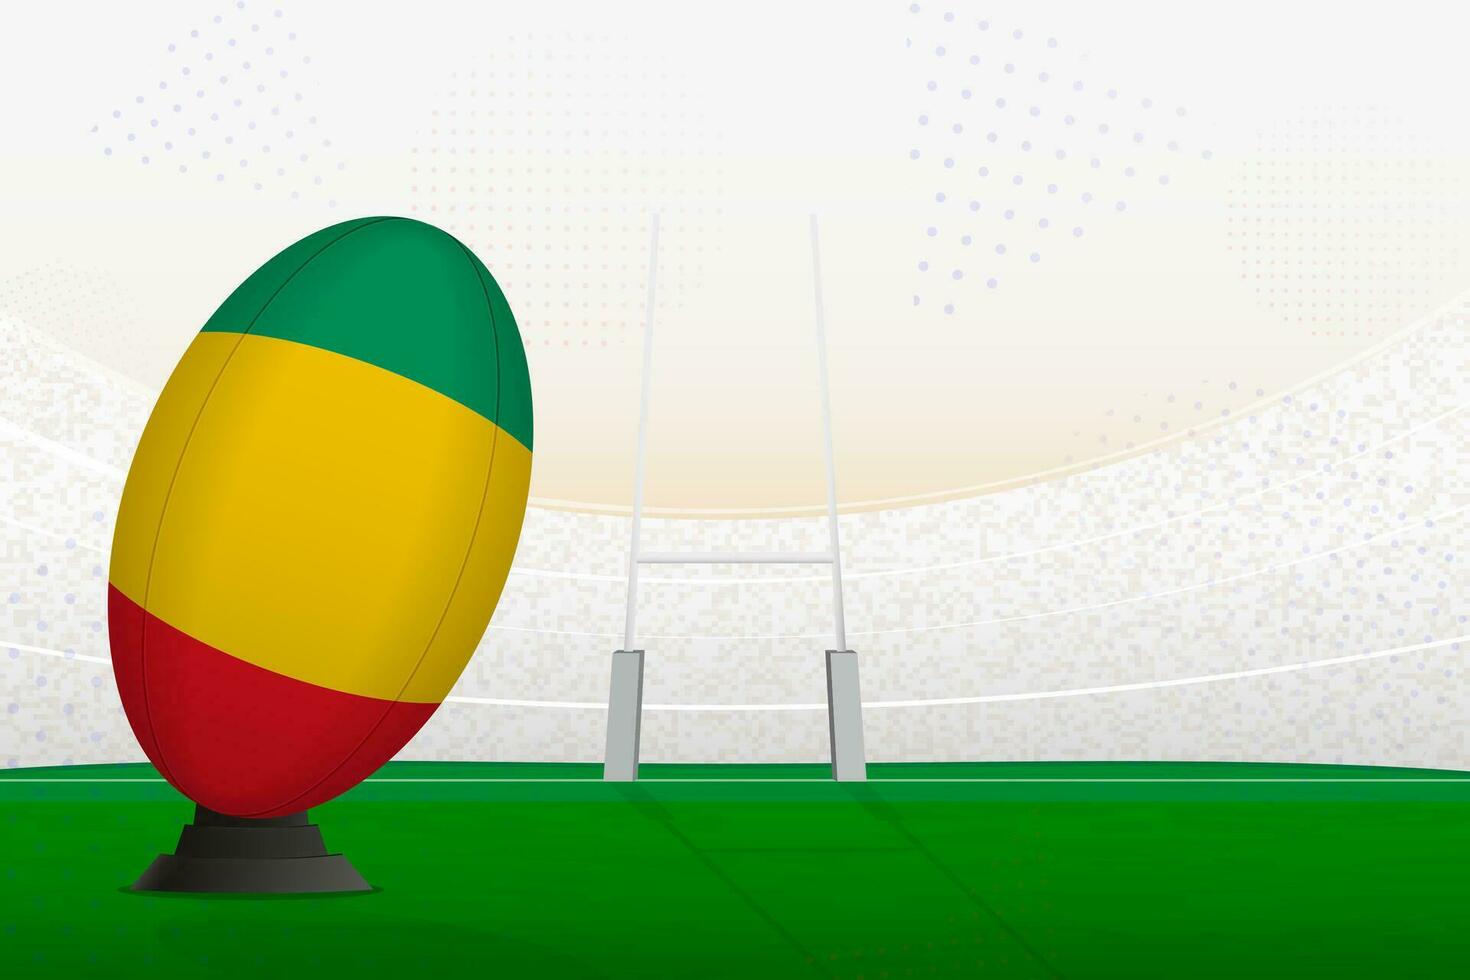 Guinea national team rugby ball on rugby stadium and goal posts, preparing for a penalty or free kick. vector